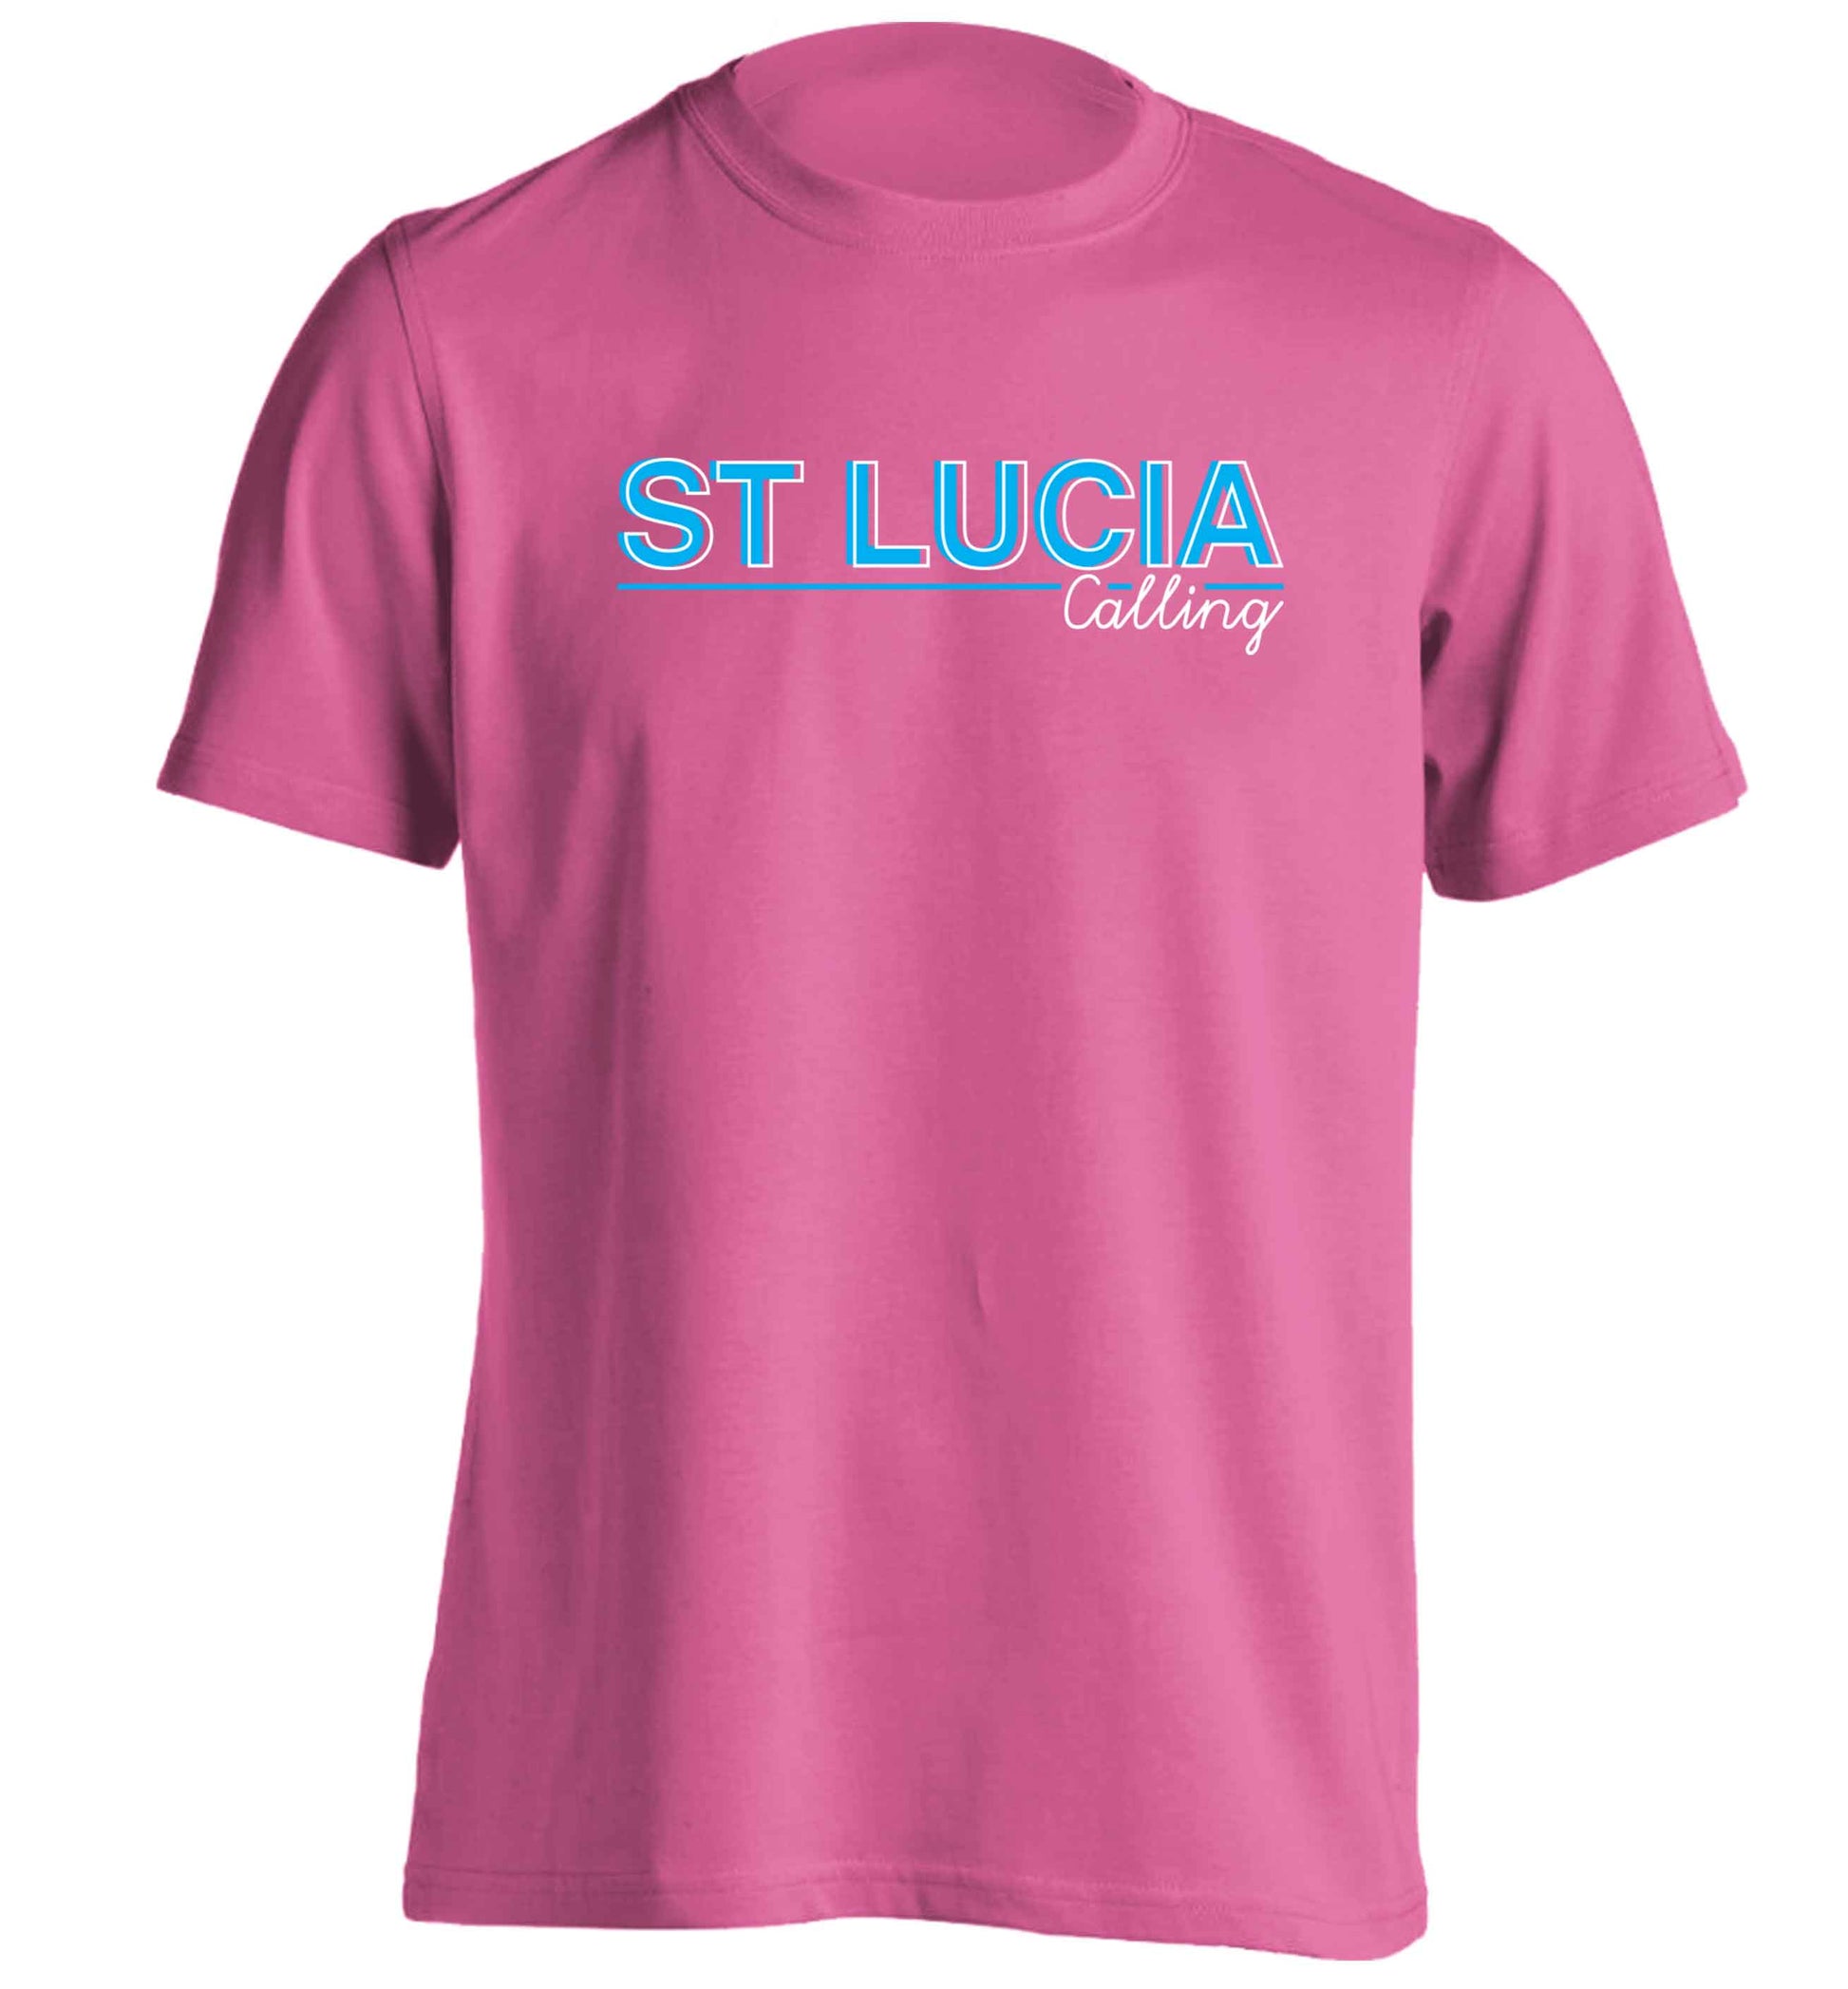 St Lucia calling adults unisex pink Tshirt 2XL